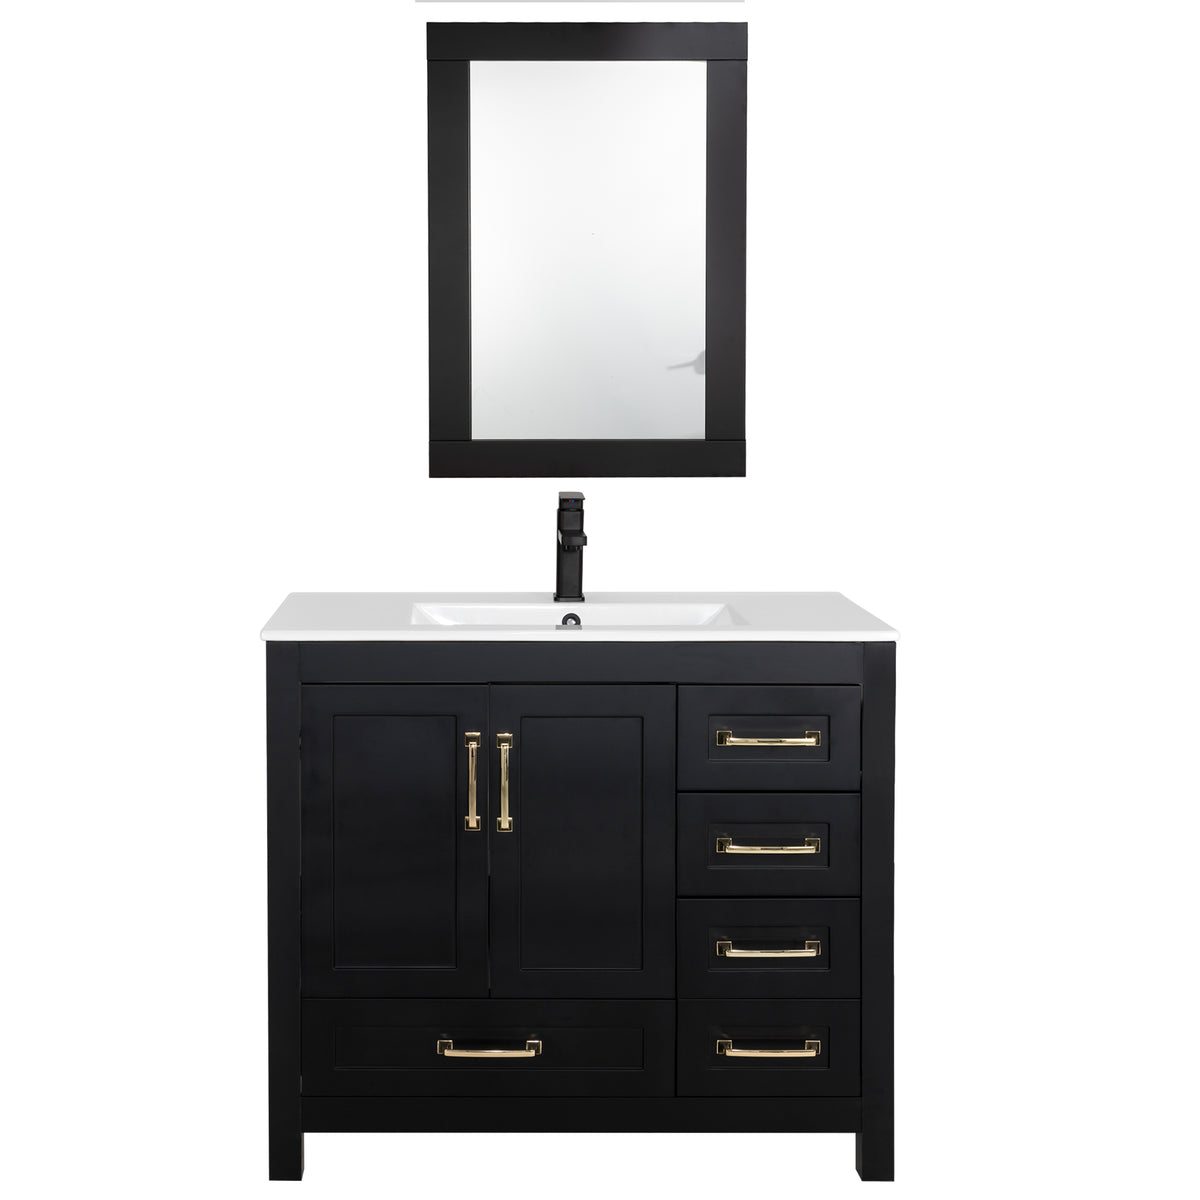 Eclife 36" Bathroom Vanities Cabinet with Sink Combo Set,Matte Black Faucet,Undermount Ceramic Sink with Thickened Wood,